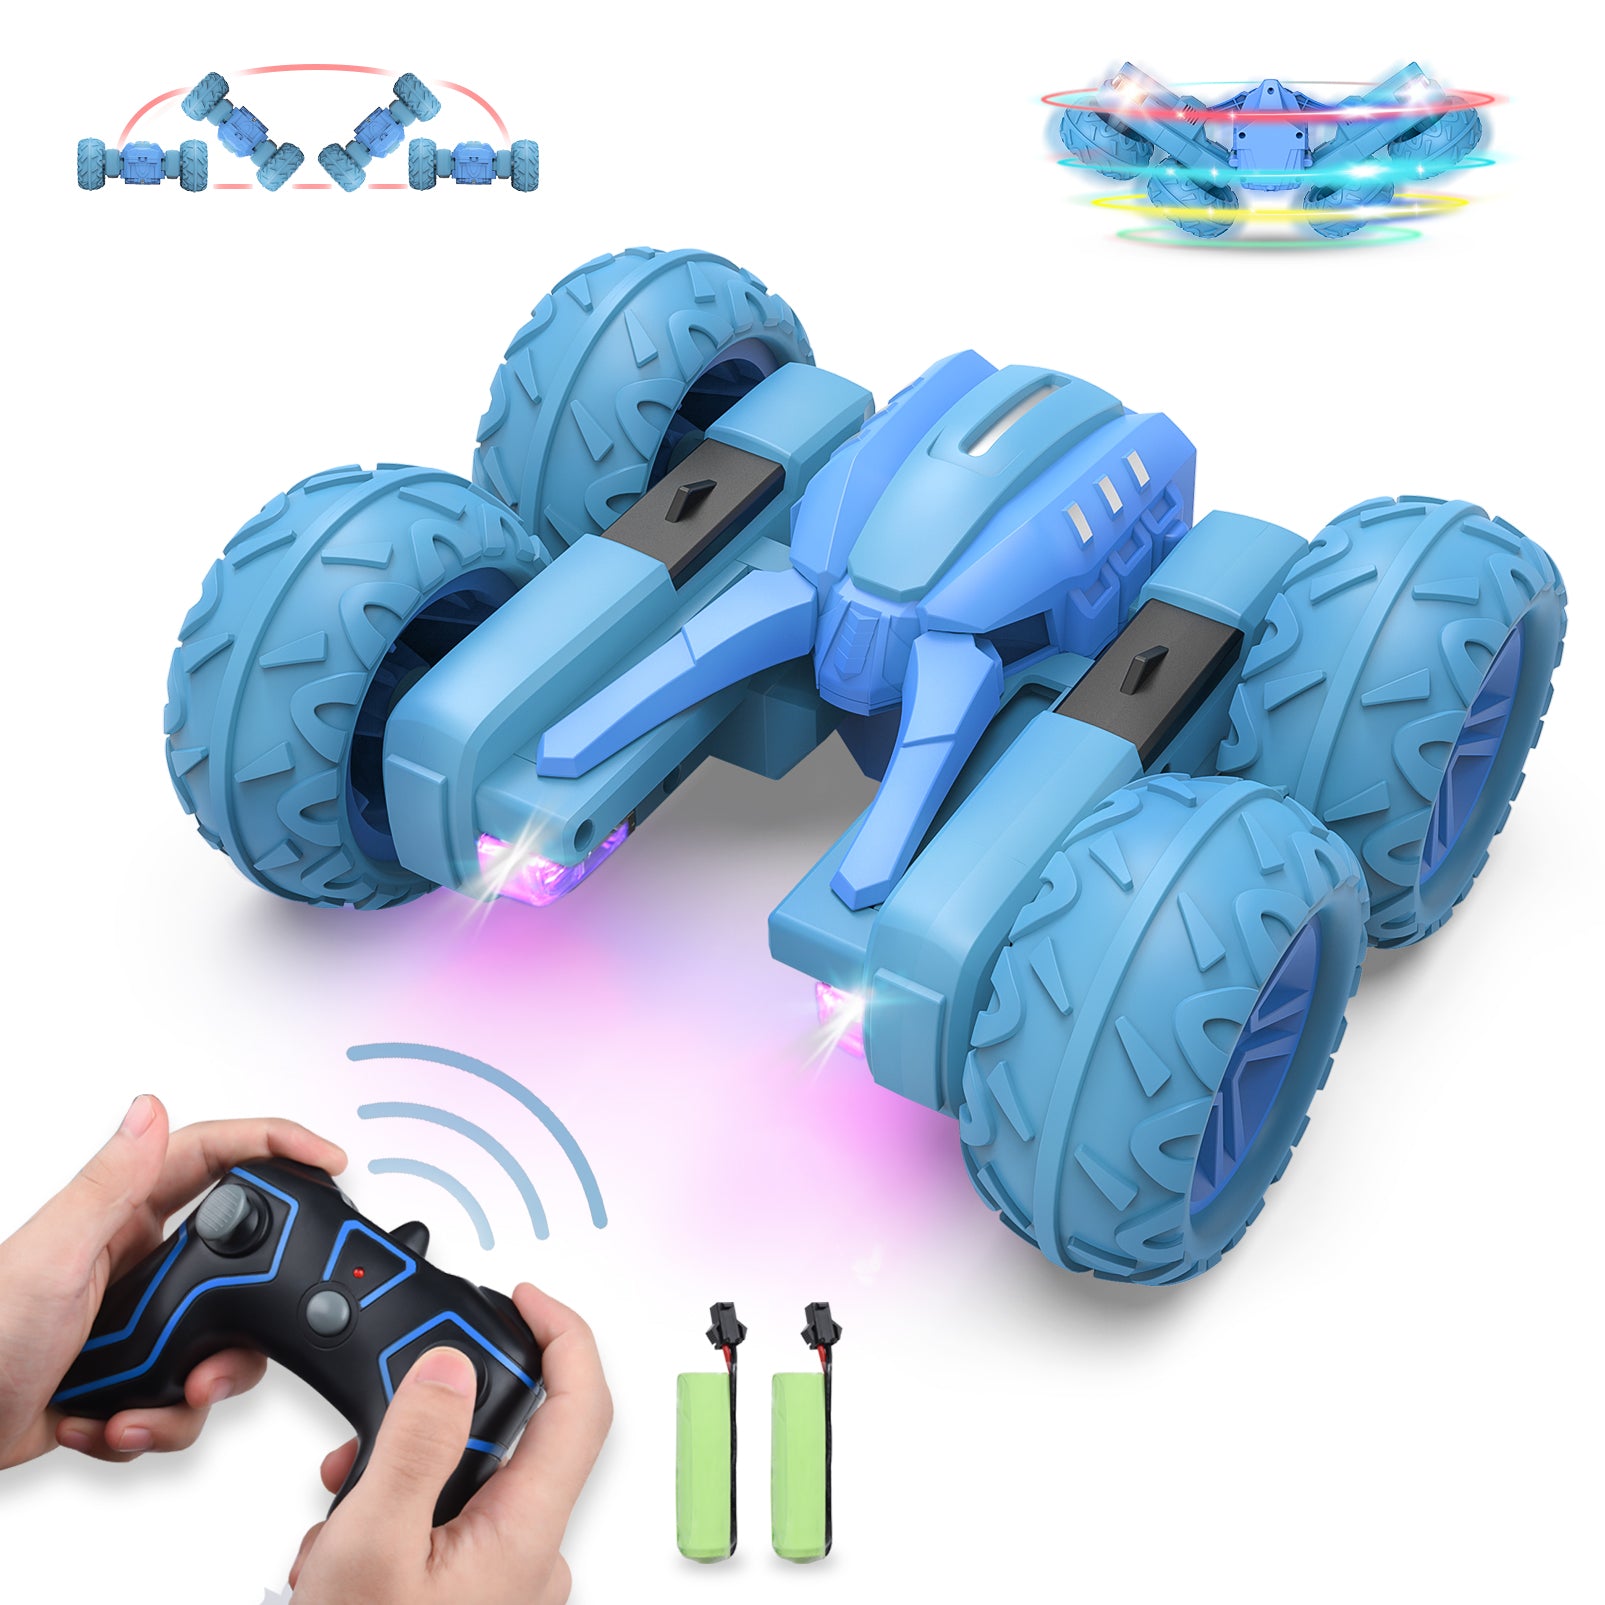 Remote Control Car for Kids 4 5 6 7 8 Years Old, RC Car Stunt with Light 4WD 2.4Ghz Double Side Rotating Racing Vehicle 360° Flips Offroad, Toy for Boys Girls Age 3-12 Birthday Xmas Gift, Blue